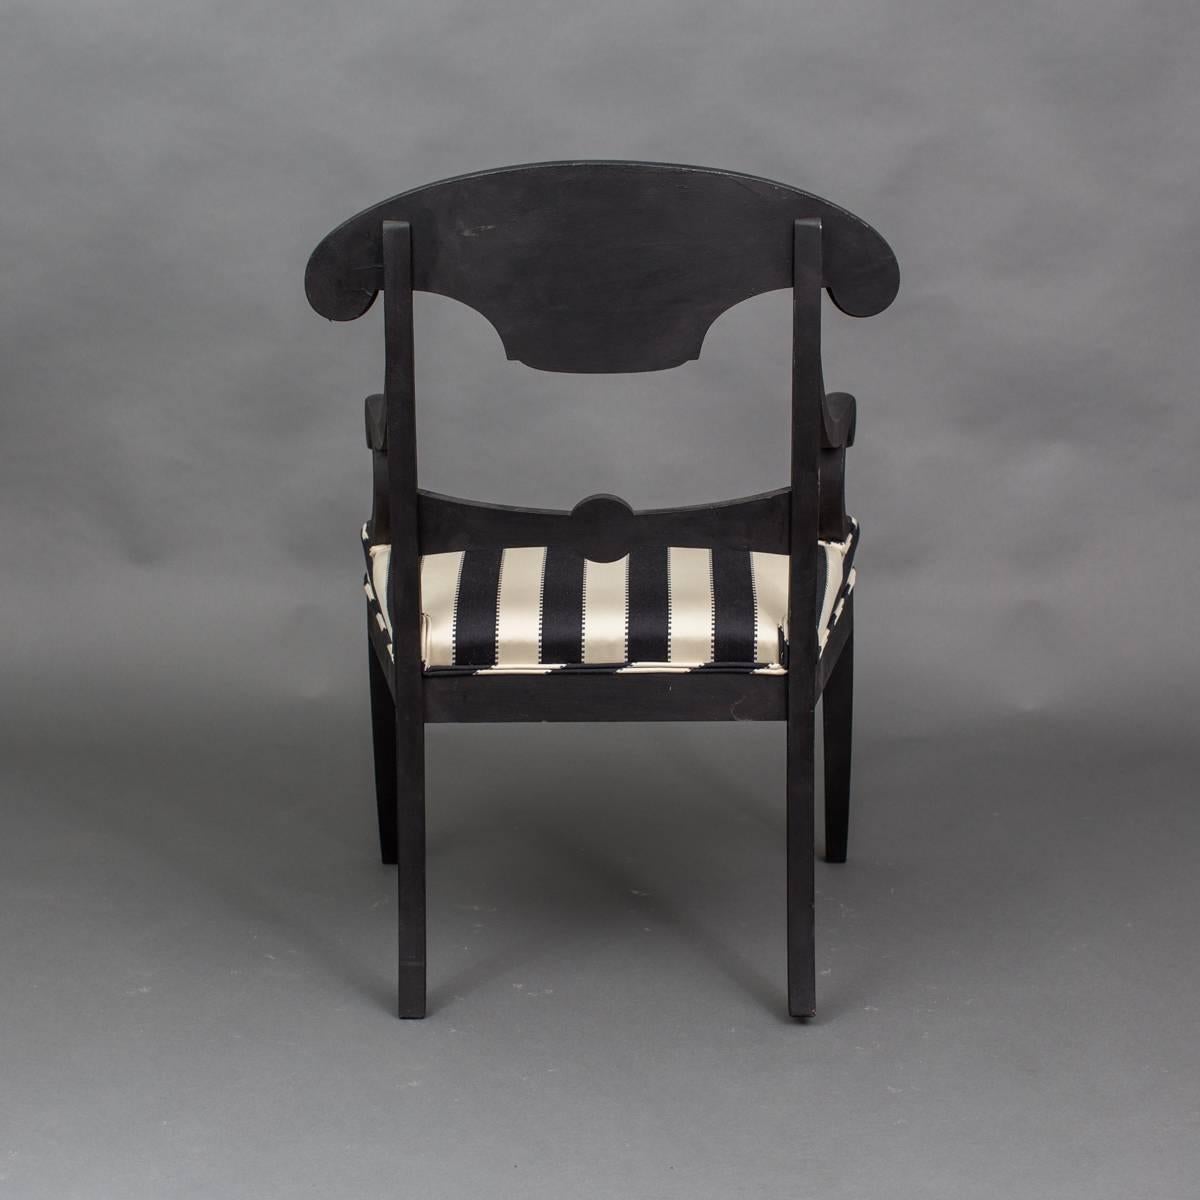 Armchair Swedish Black Neoclassical, 19th Century Sweden For Sale 3